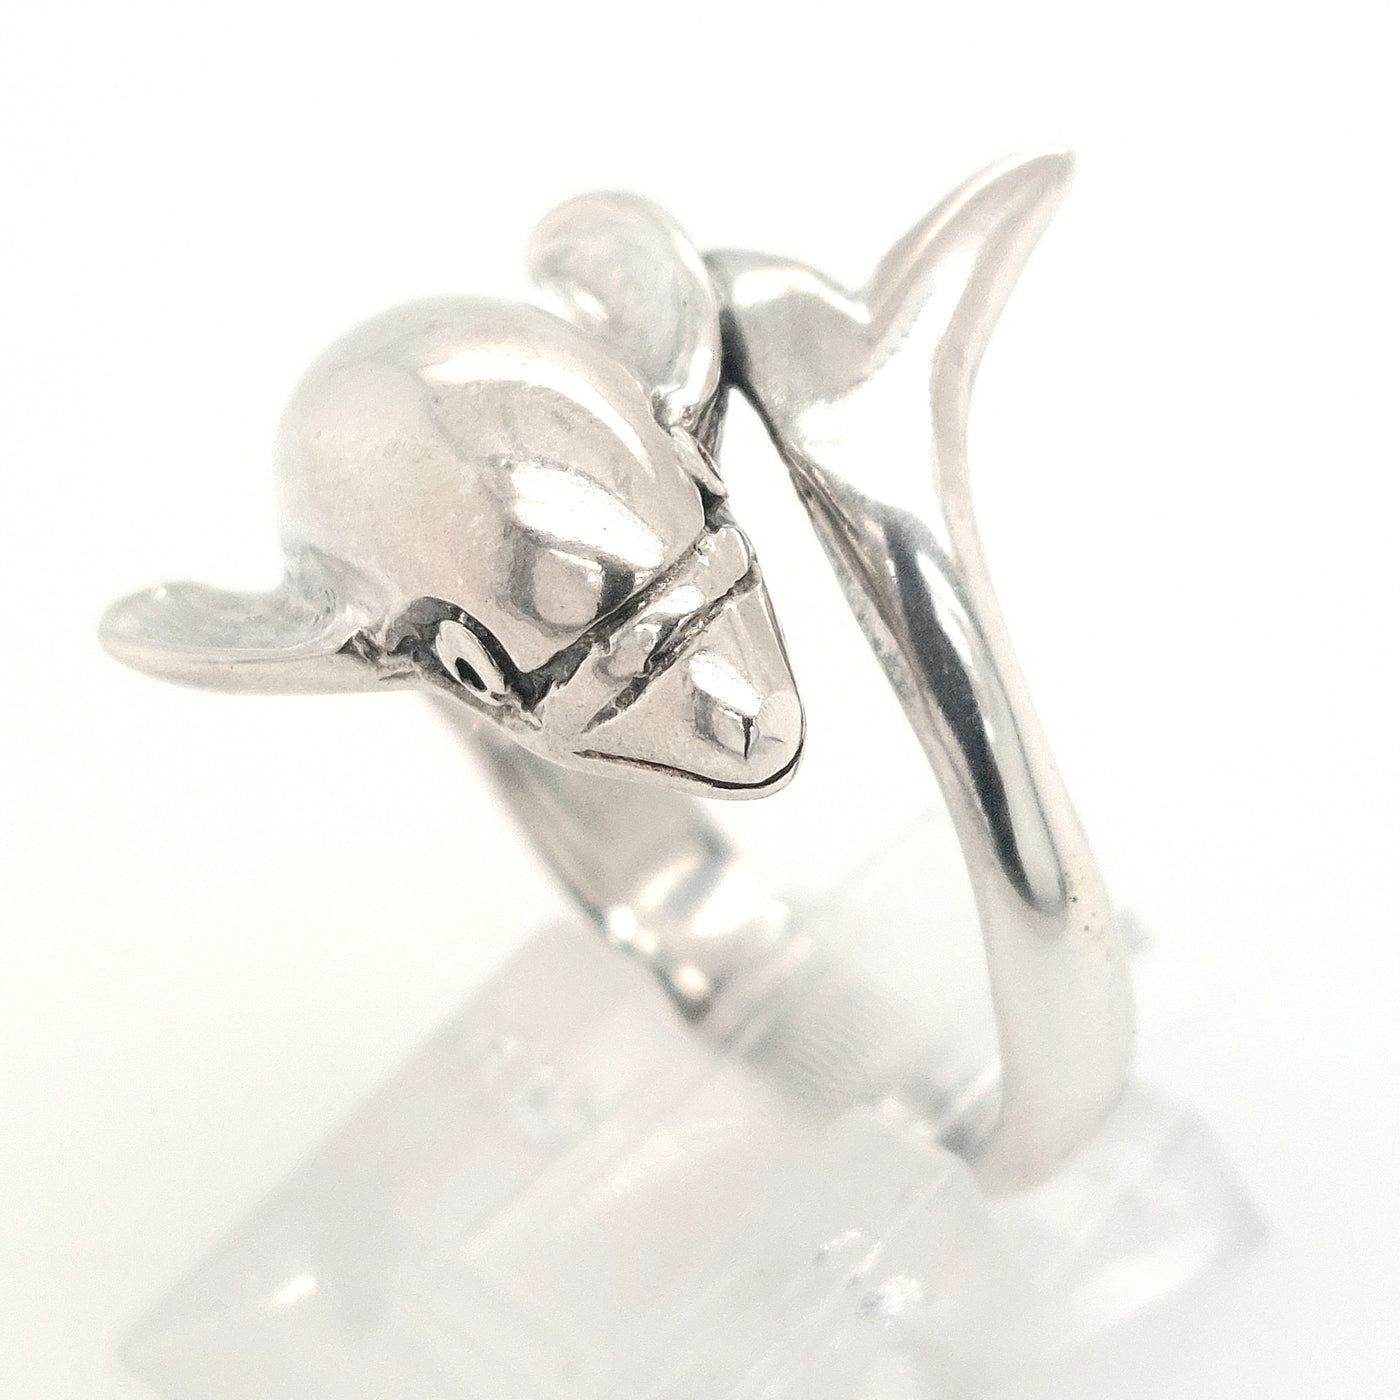 SS Dolphin Ring Size:7.50